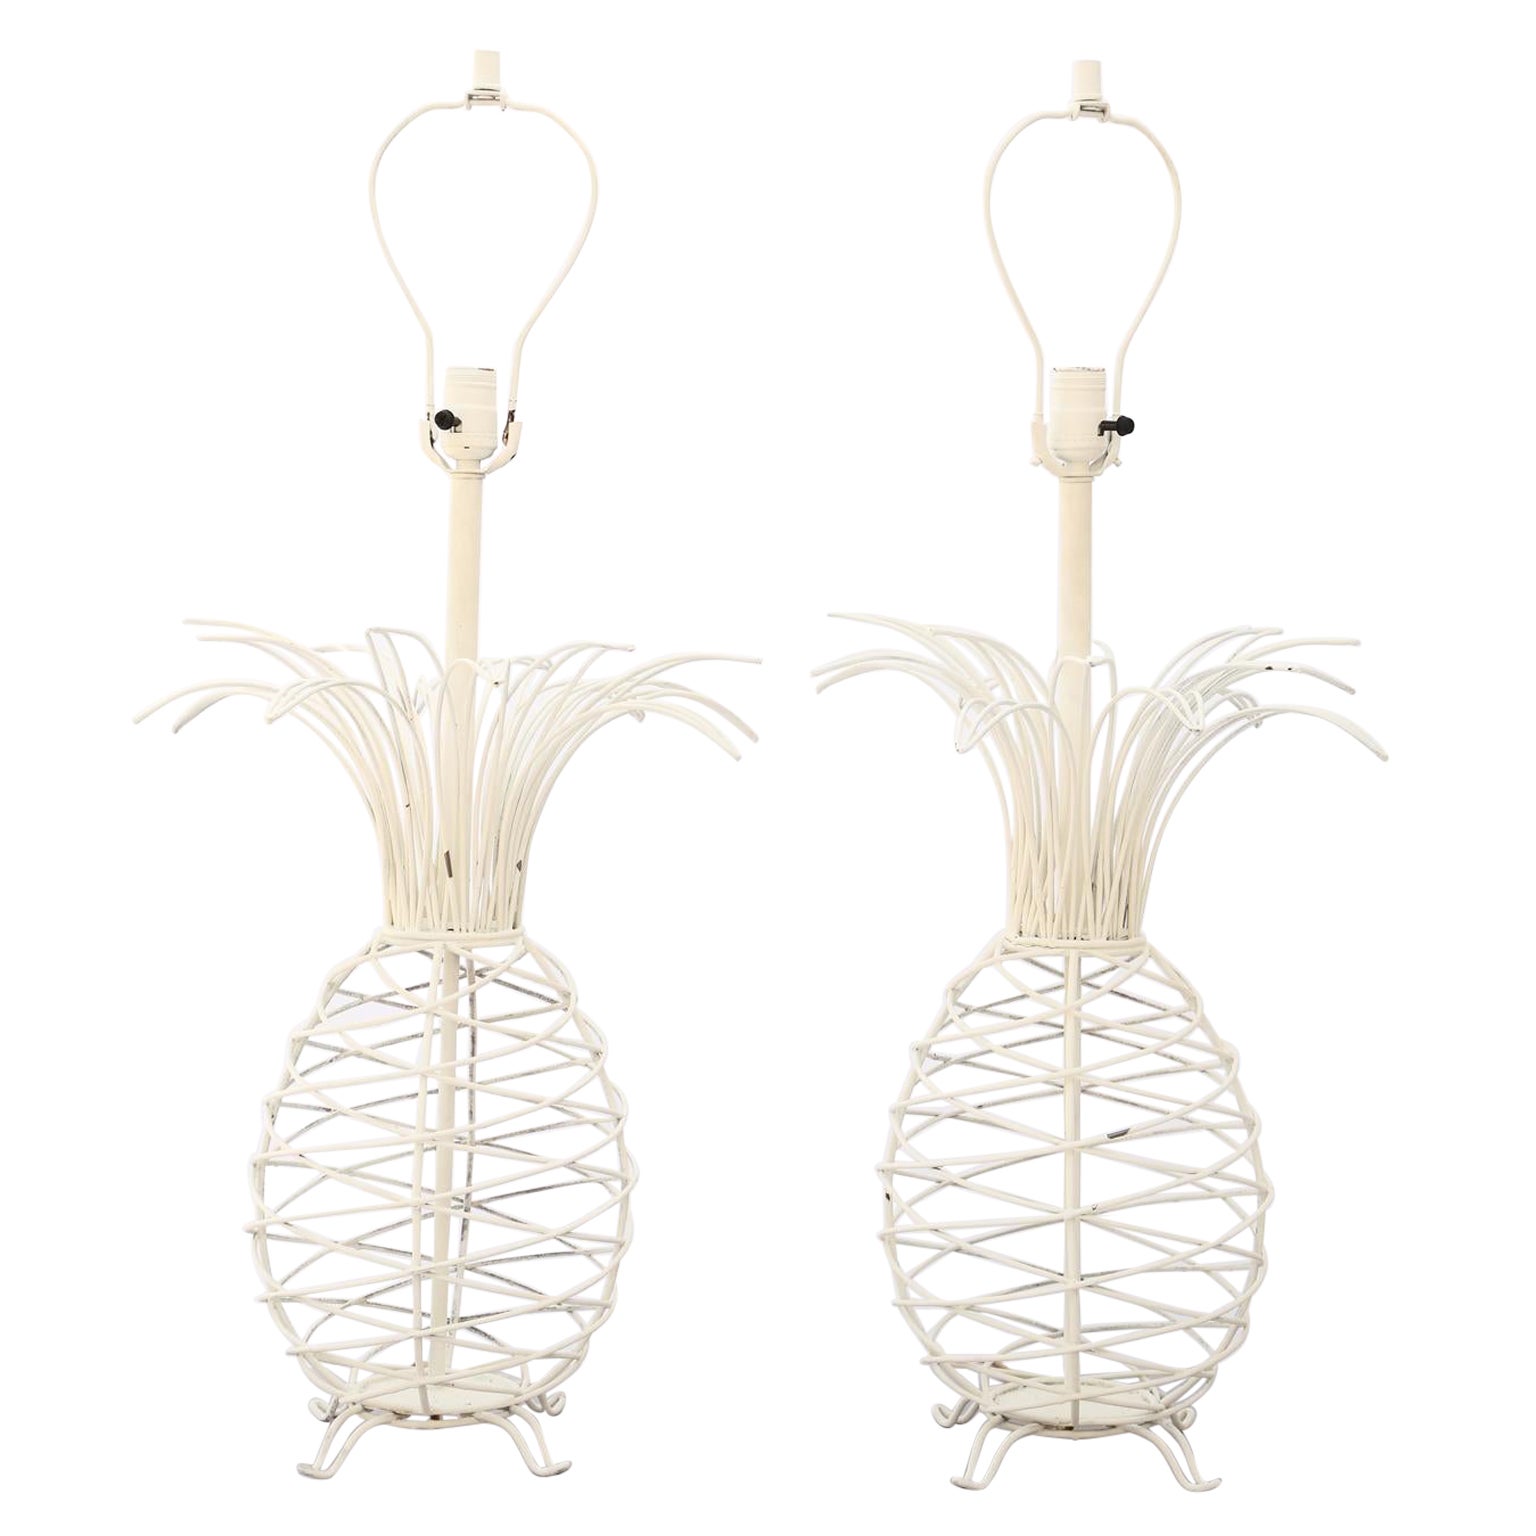 Pair of Vintage Wire Pineapple Lamps For Sale